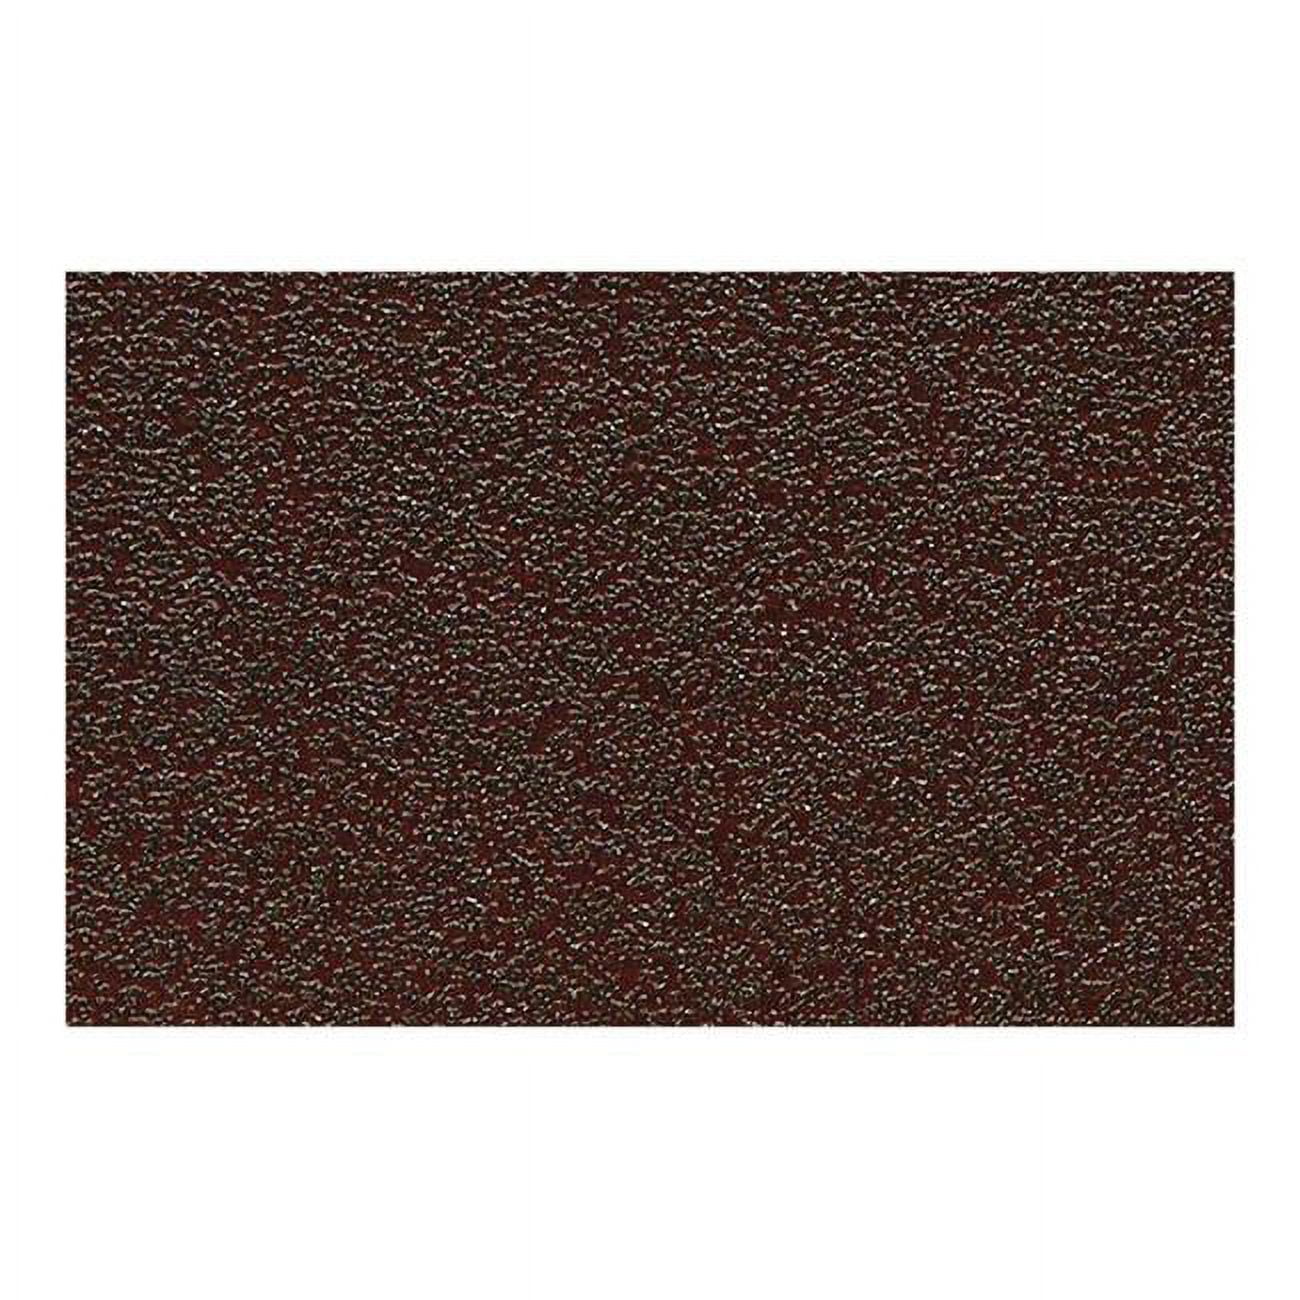 1861806 18 X 12 In. 24 Grit Extra Coarse Silicon Carbide Floor Sanding Sheet - 10 Per Pack